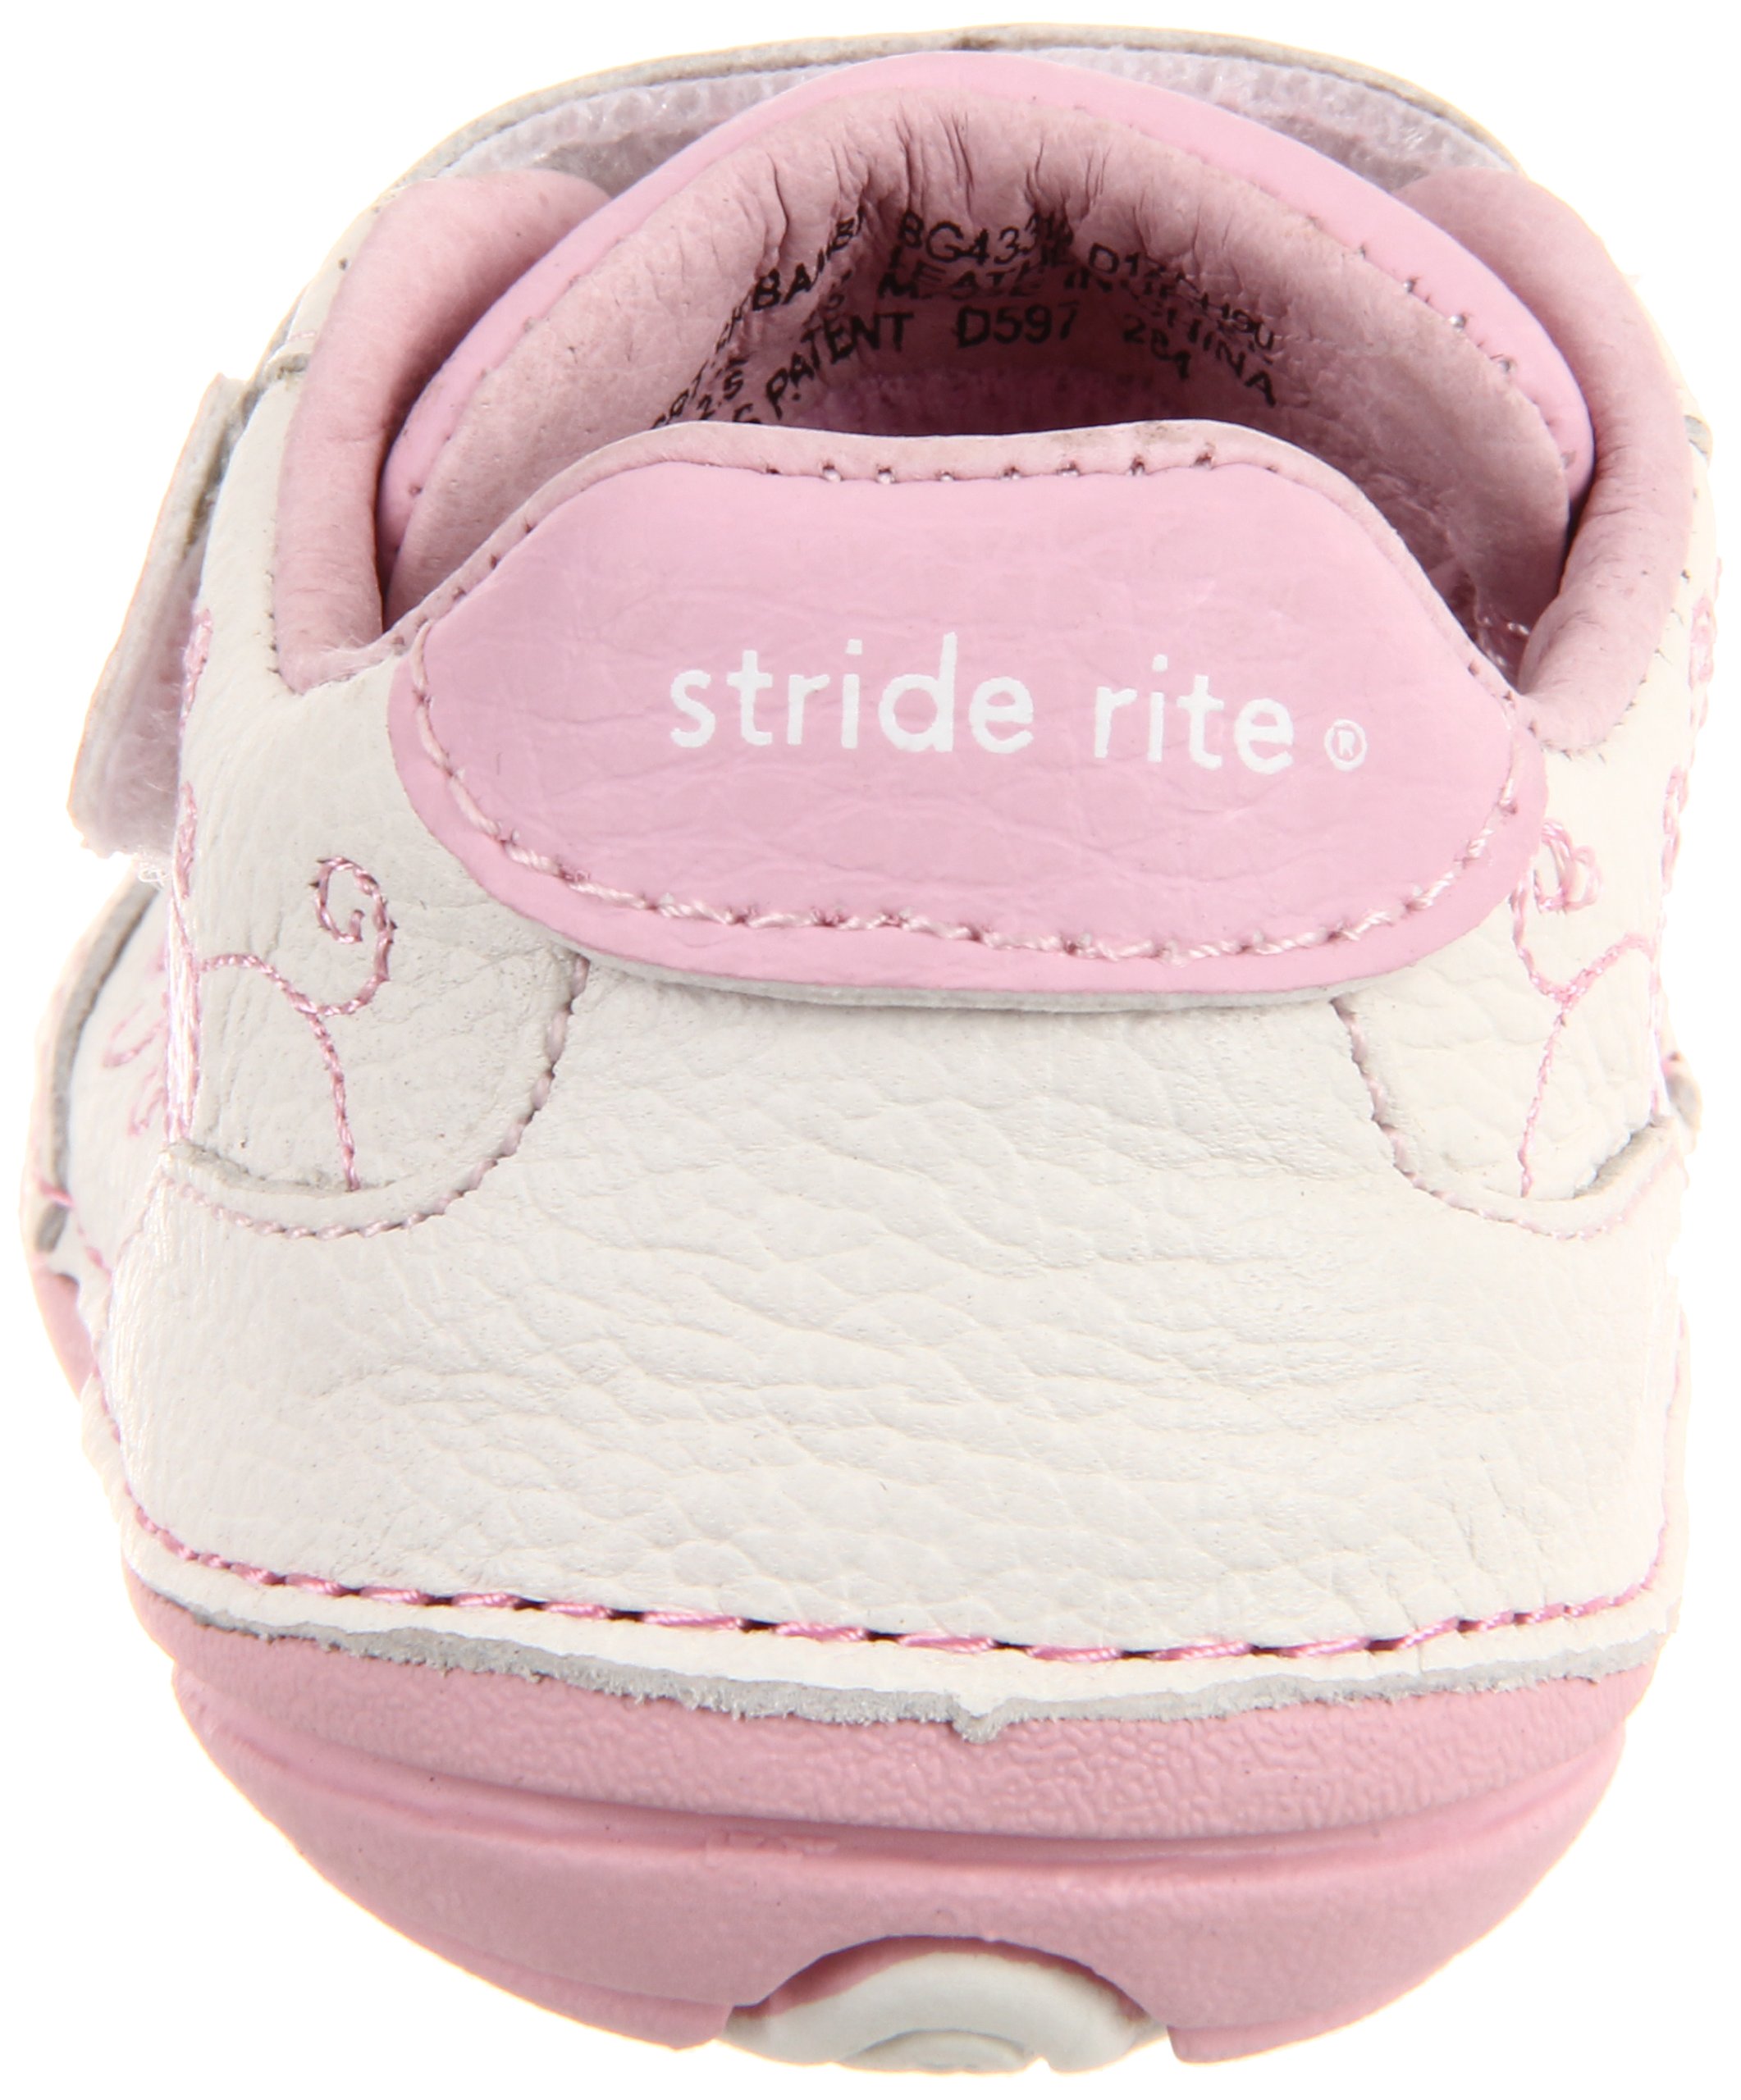 Stride Rite Soft Motion Baby and Toddler Girls Bambi Athletic Sneaker